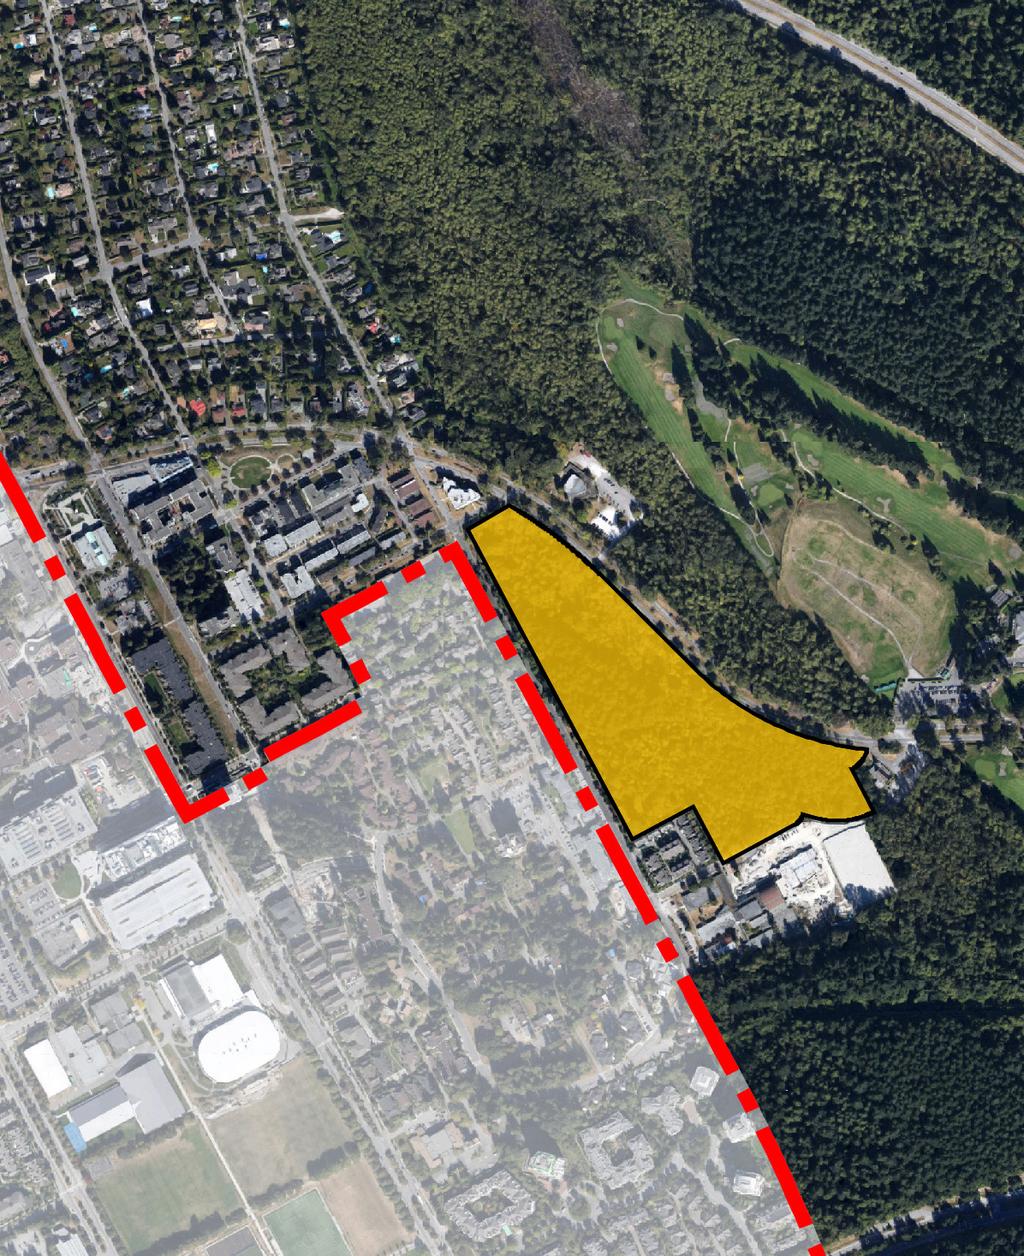 The UEL is reviewing a rezoning application submitted by Colliers International on behalf of the Musqueam Indian Band, which is seeking amendments to the UEL Official Community Plan and Land Use